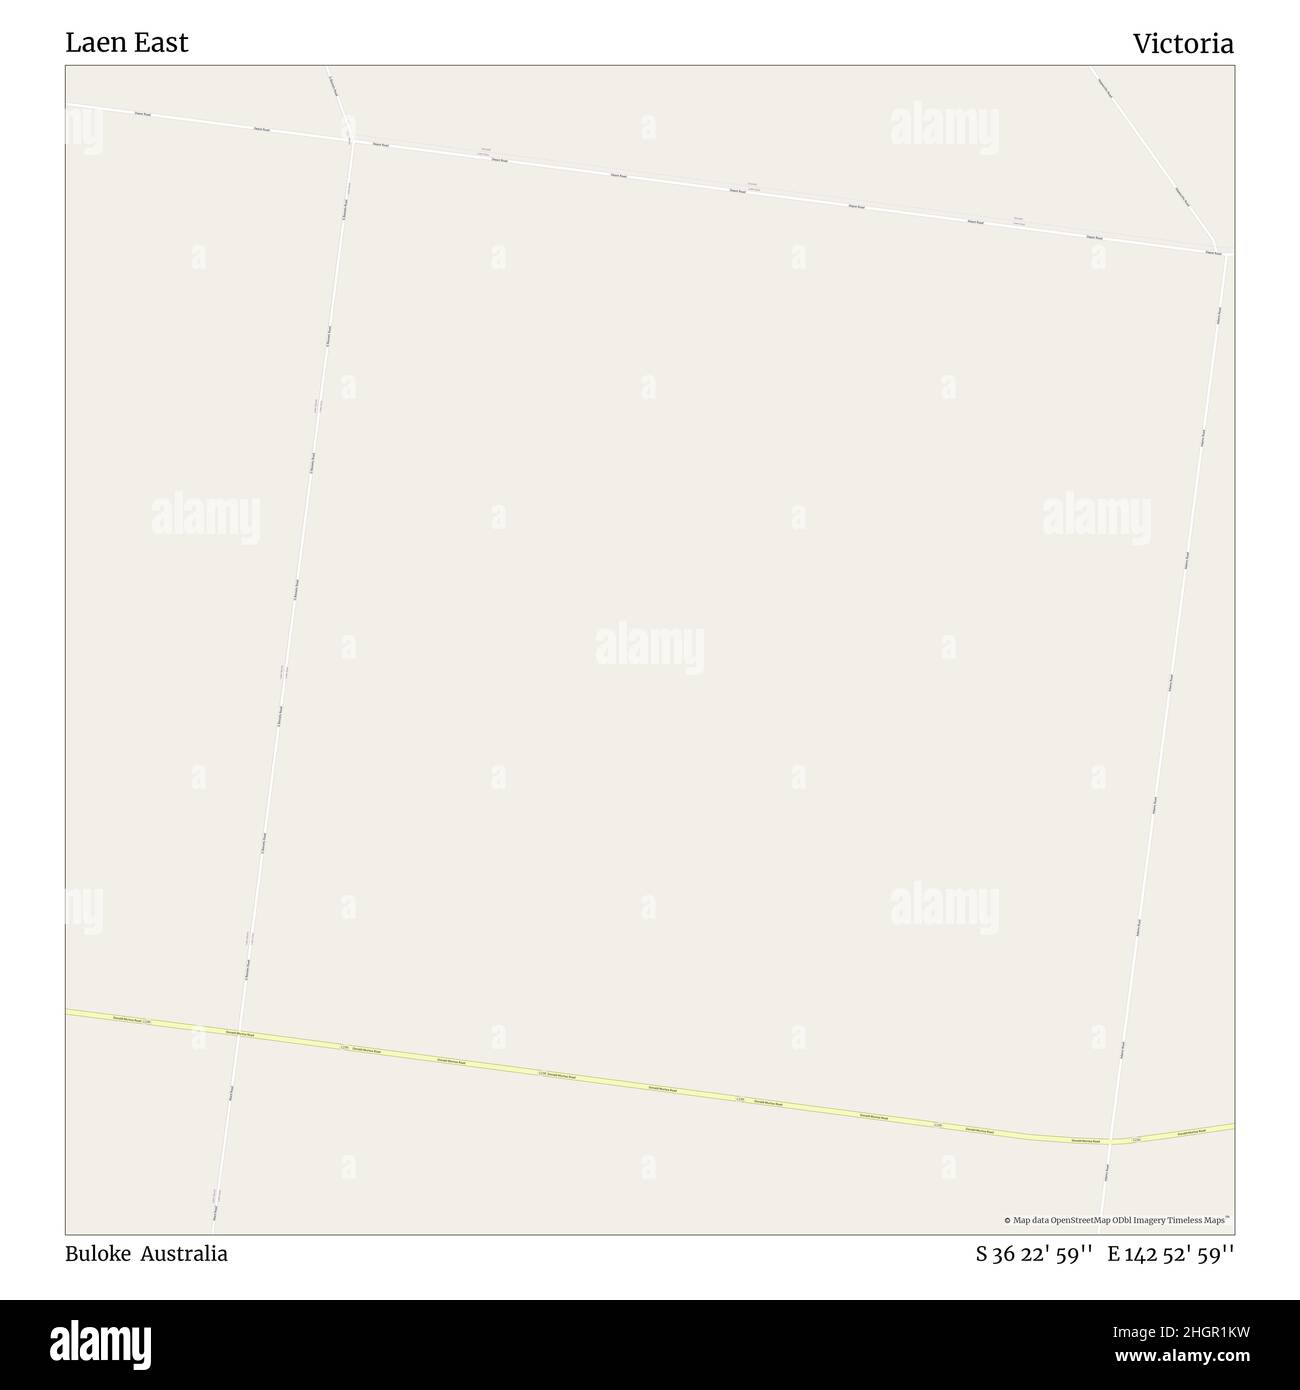 Laen East, Buloke, Australia, Victoria, S 36 22' 59'', E 142 52' 59'', map, Timeless Map published in 2021. Travelers, explorers and adventurers like Florence Nightingale, David Livingstone, Ernest Shackleton, Lewis and Clark and Sherlock Holmes relied on maps to plan travels to the world's most remote corners, Timeless Maps is mapping most locations on the globe, showing the achievement of great dreams Stock Photo